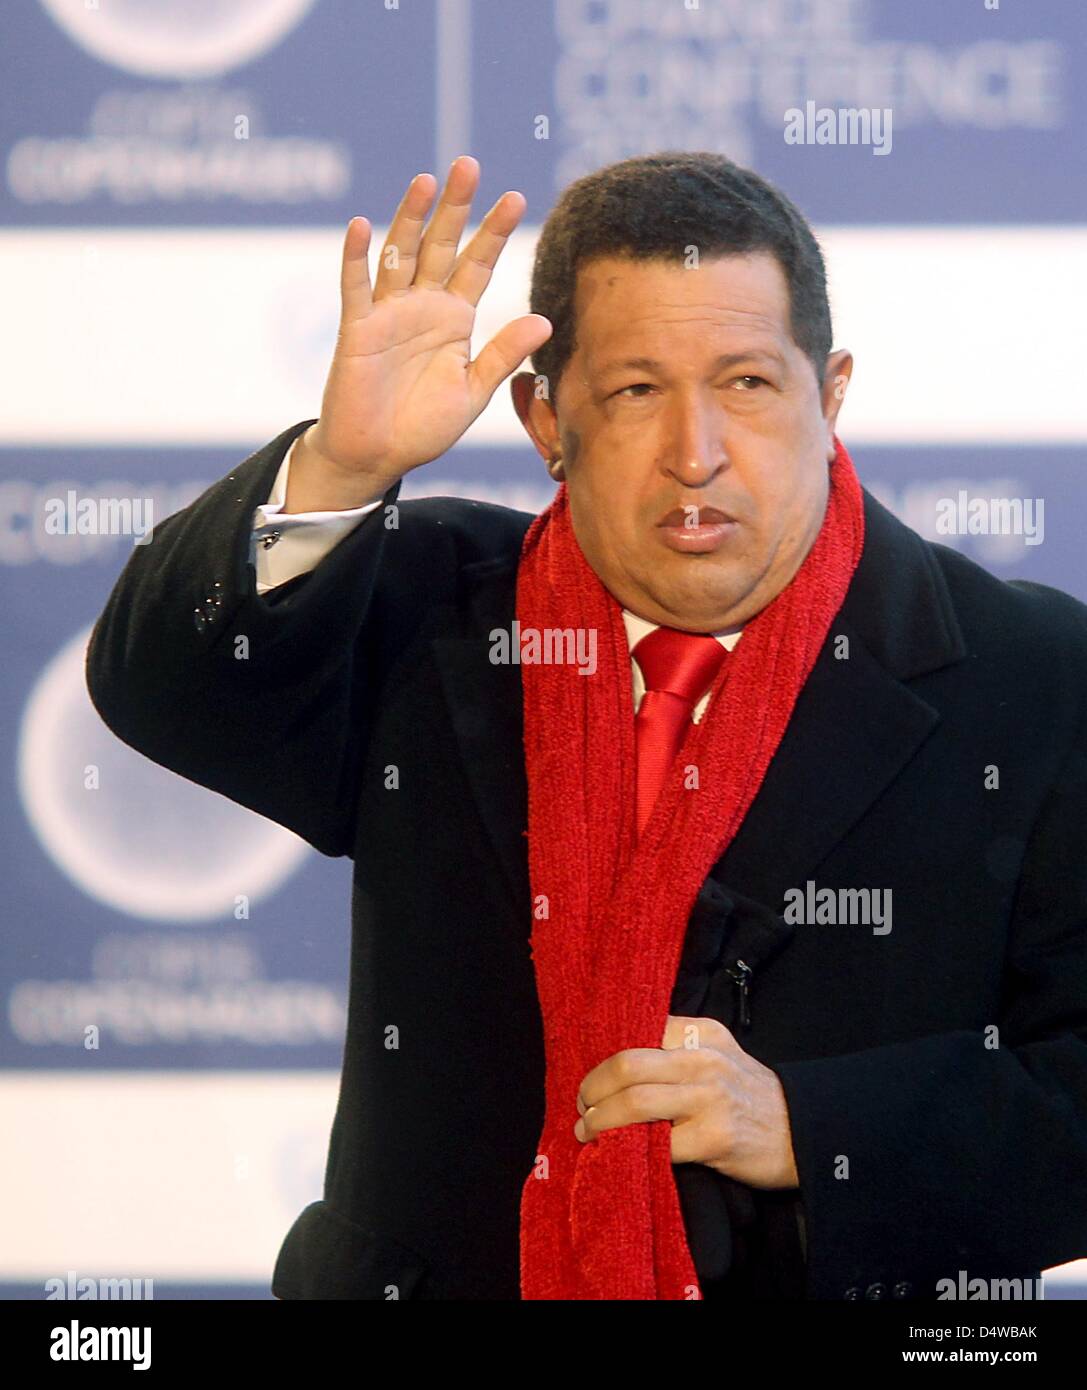 (FILE) A file picture dazed 18 December 2009 of Venezuelan President Hugo Chavez at the UN Climate Conference in Copenhagen, Denmark. The opposition to Venezuelan President Hugo Chavez has learnt the lesson from 2005: on Sunday, they will field candidates in the country's legislative election. More than a dozen parties unite in the alliance 'Mesa de la Unidad Democratica', the 'Tab Stock Photo